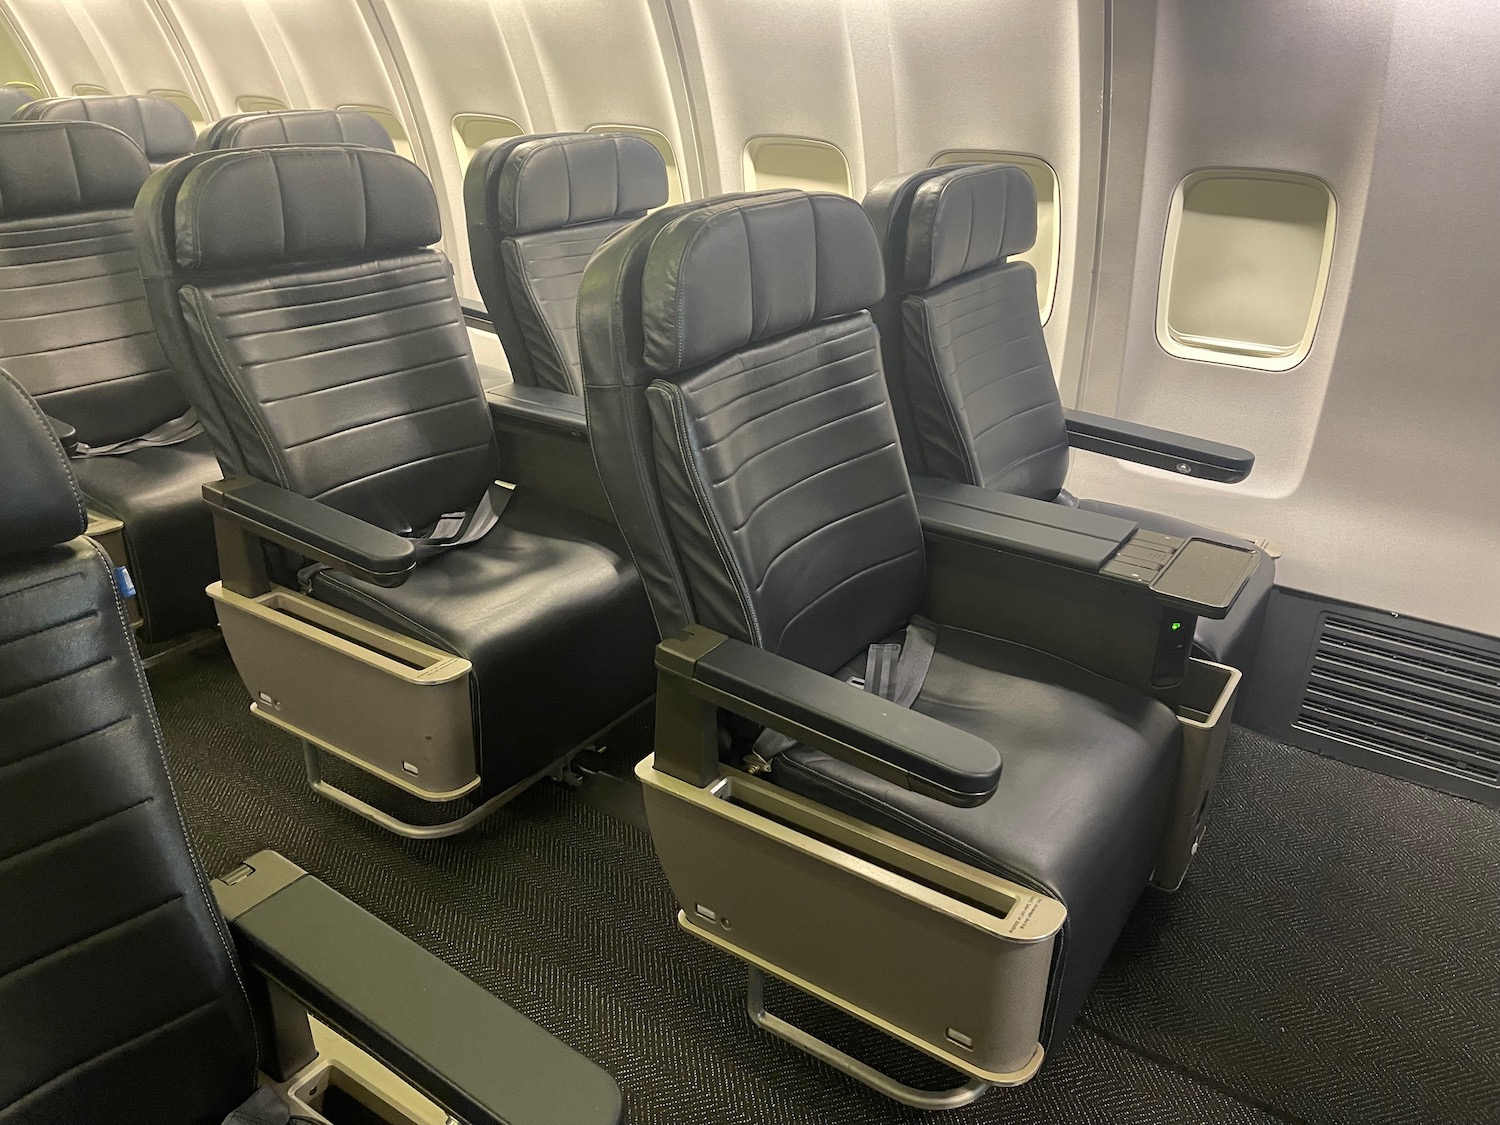 a row of black chairs in an airplane